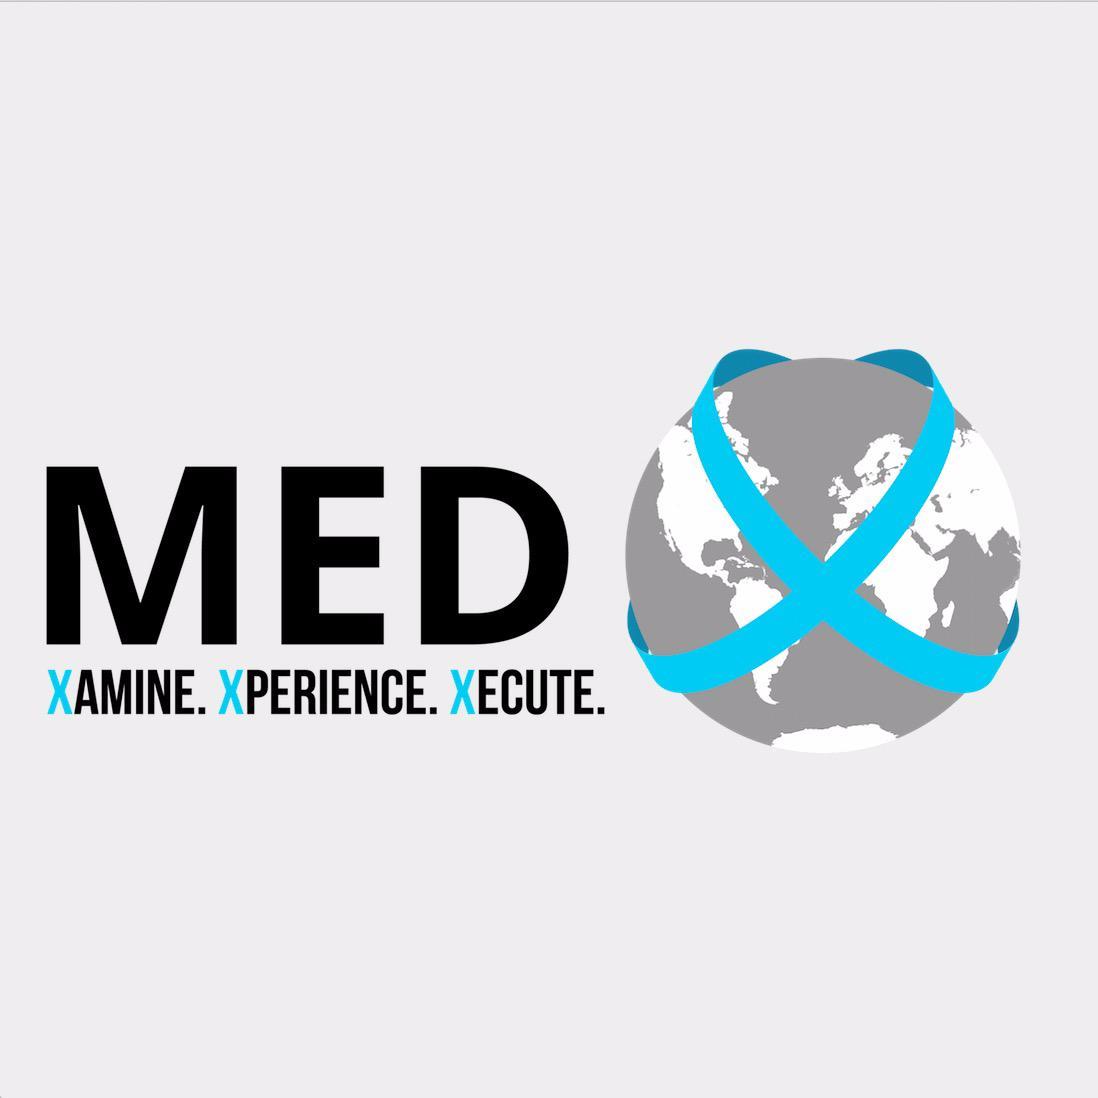 MedX Global is designed to engage undergraduate students in global health development focusing on health as a human right. FB: https://t.co/okzjrSbuxS IG: @medxgmu